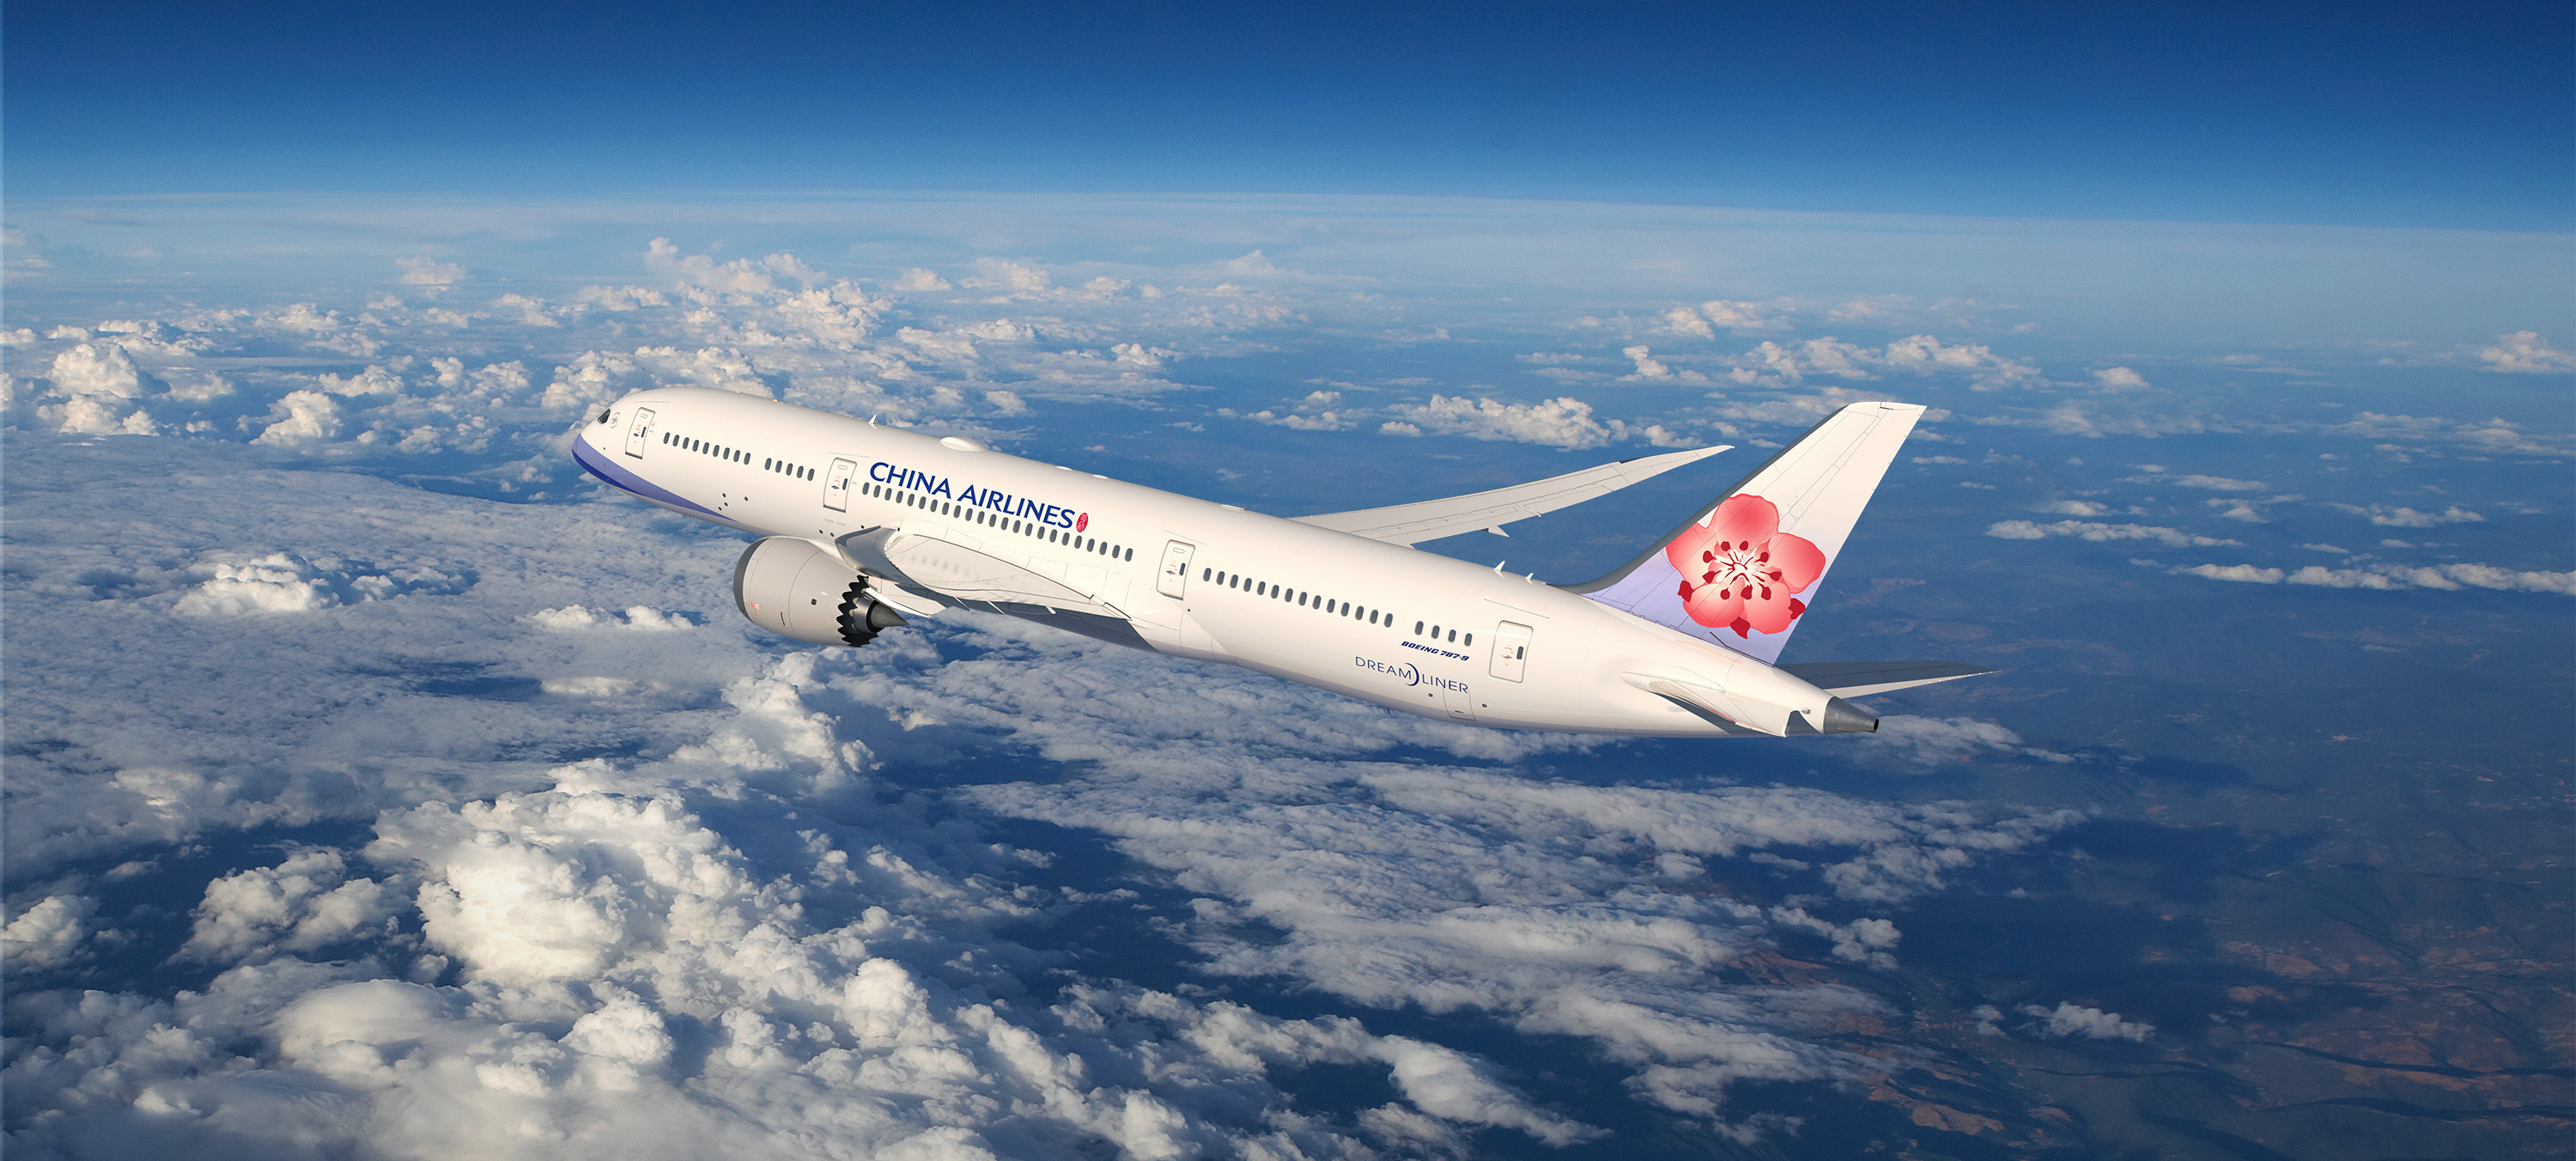 19-facts-about-china-airlines